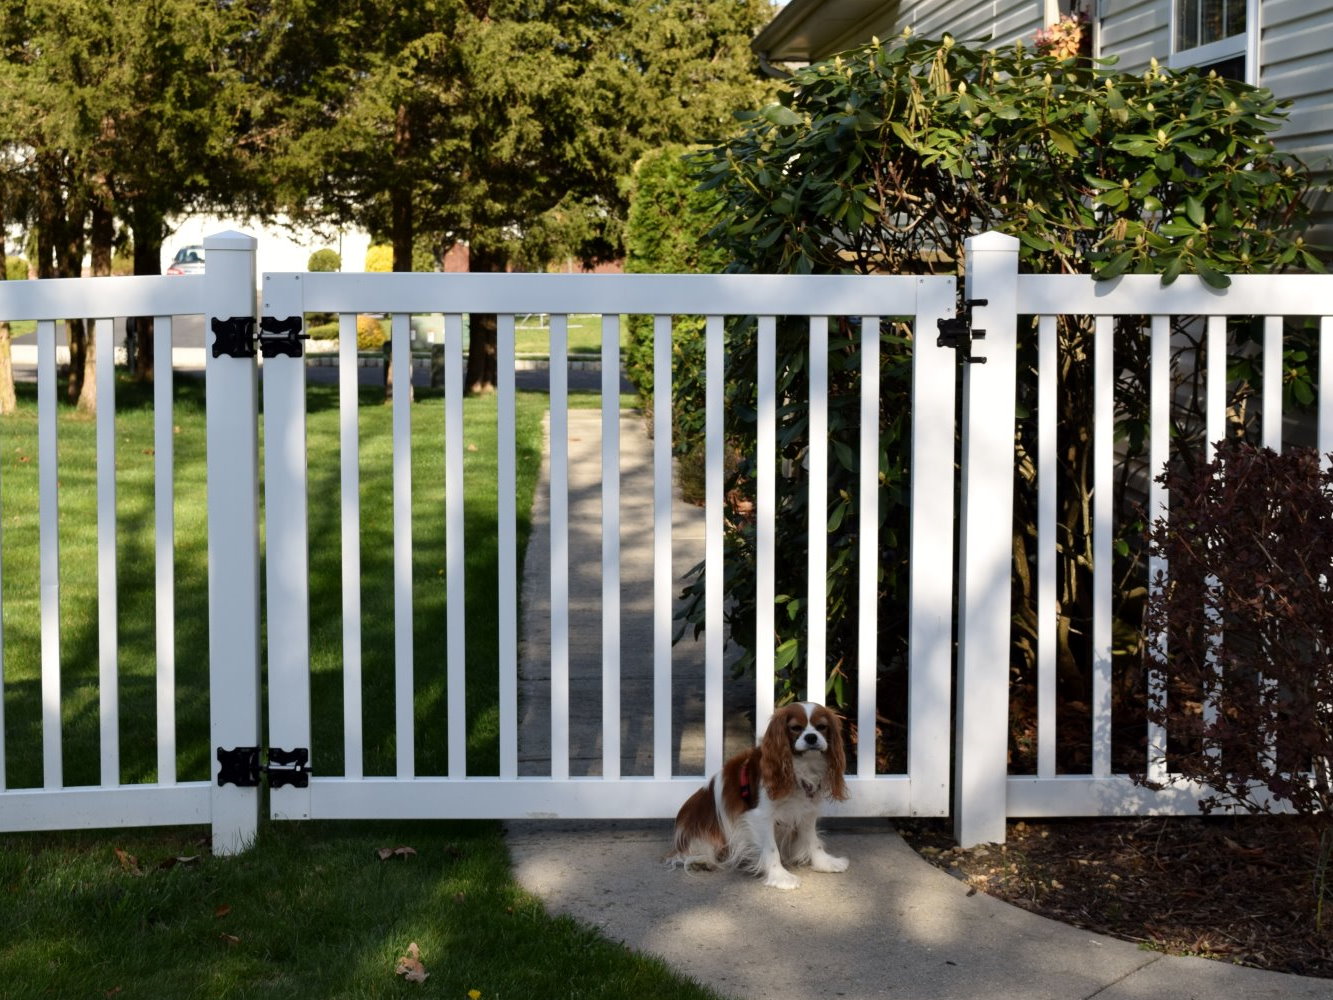 Nashville Arkansas residential and commercial fencing